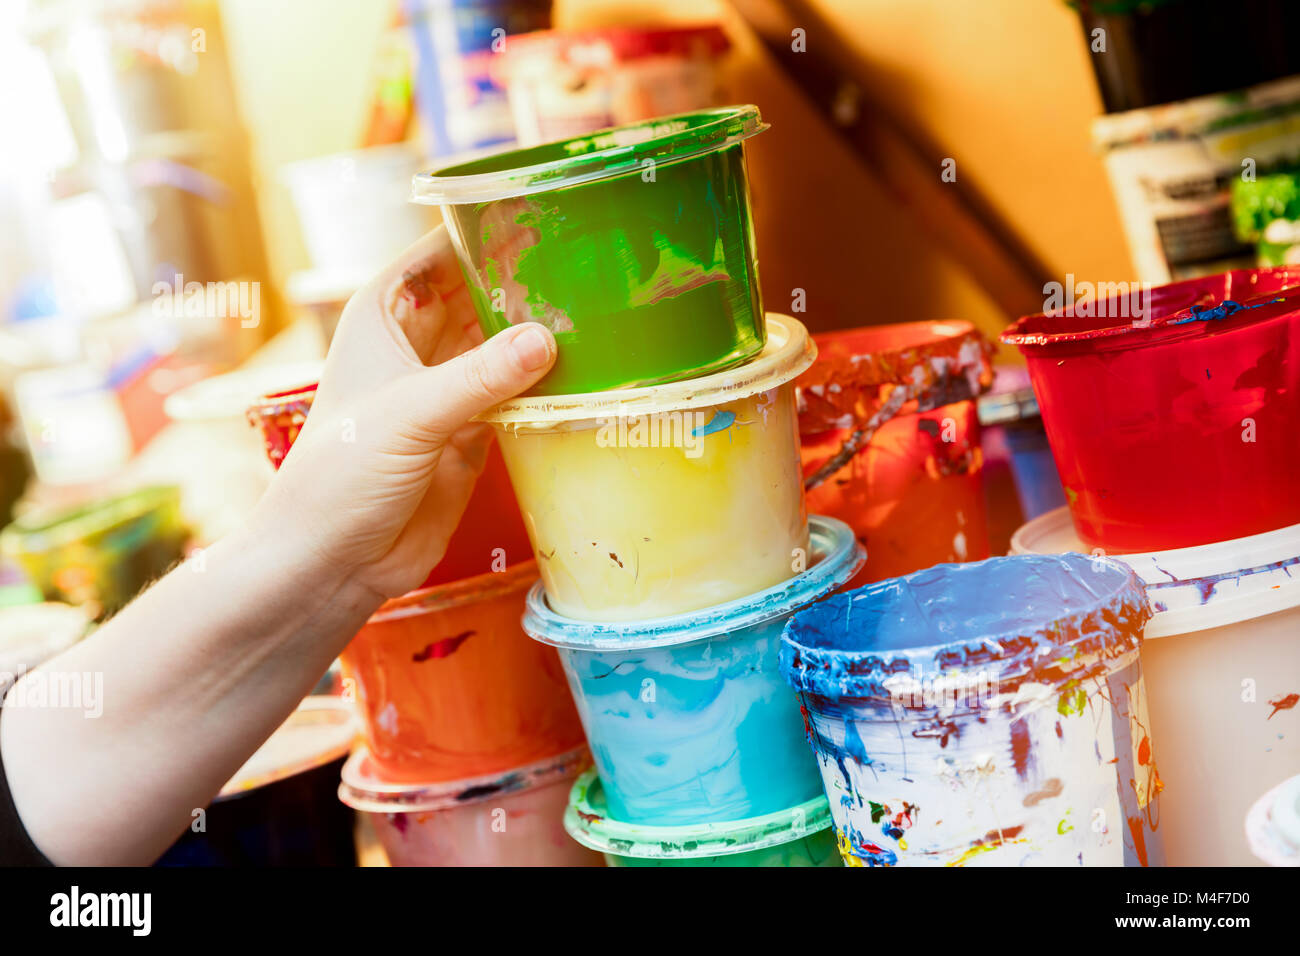 Artist reaching for a liquid paint container. Stock Photo